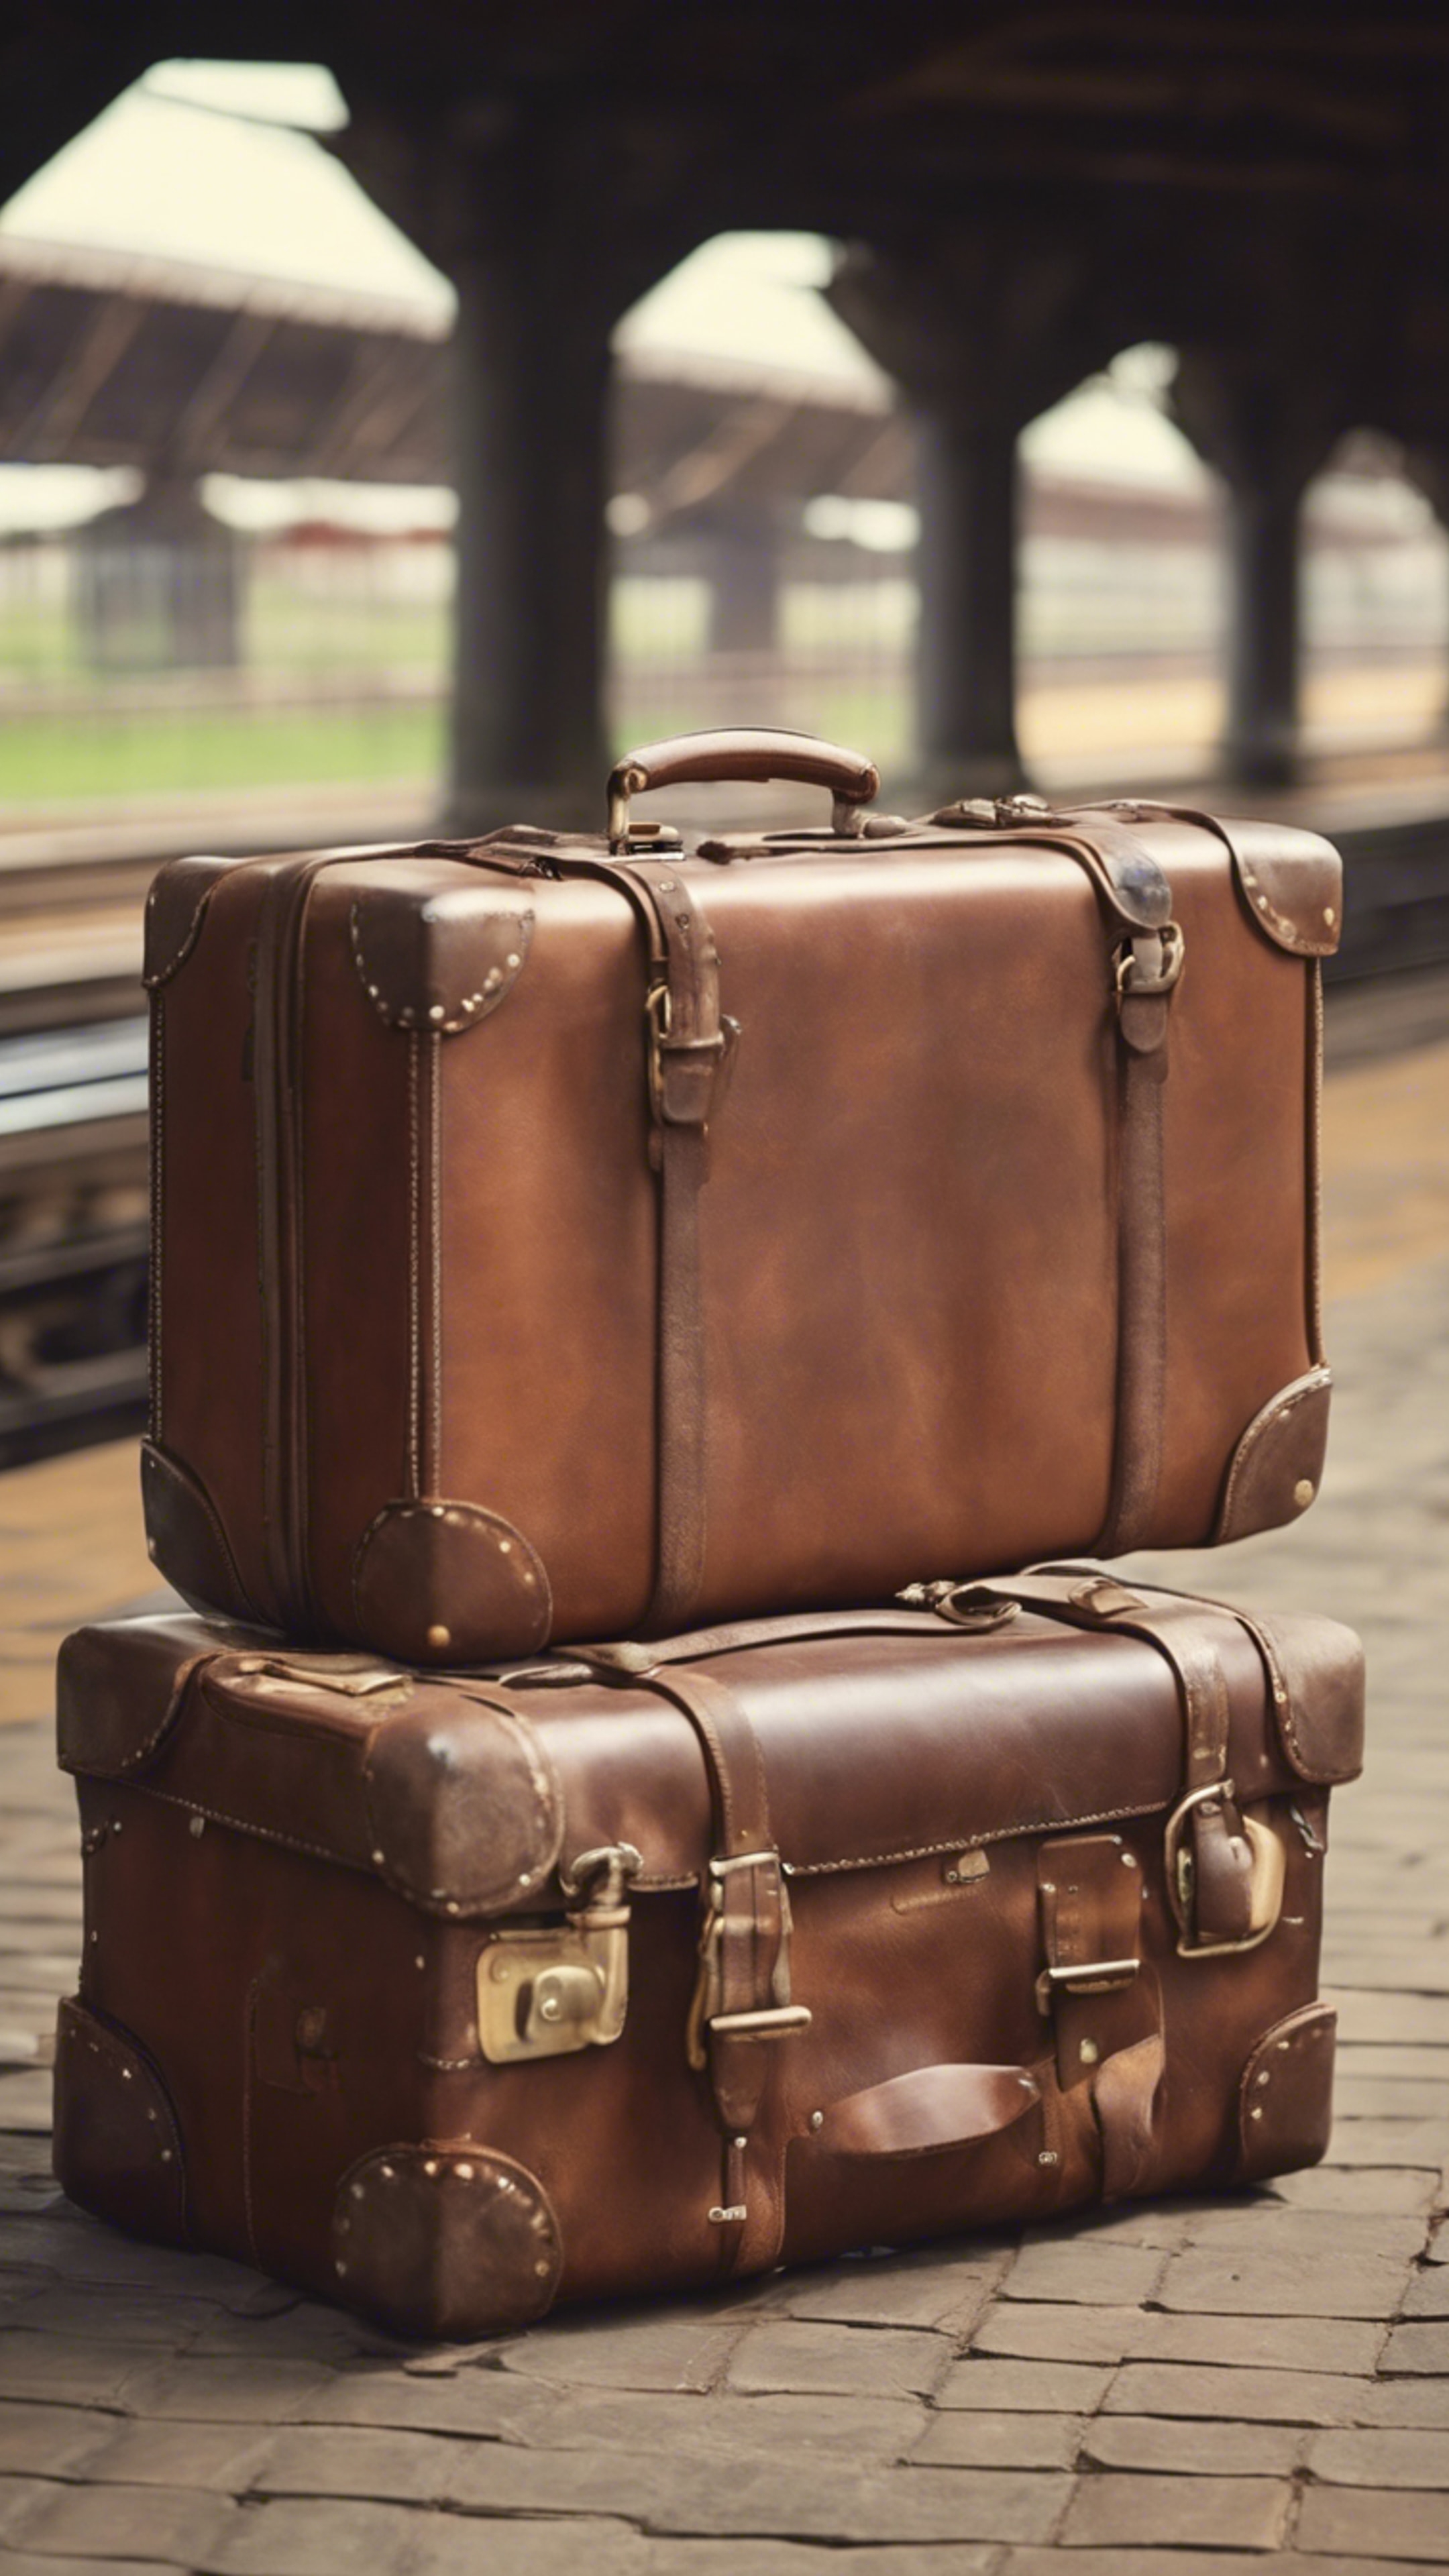 A rustic brown leather suitcase with travel tags, sitting at a quaint railway station. Тапет[6b7e956de06740cdbd0e]